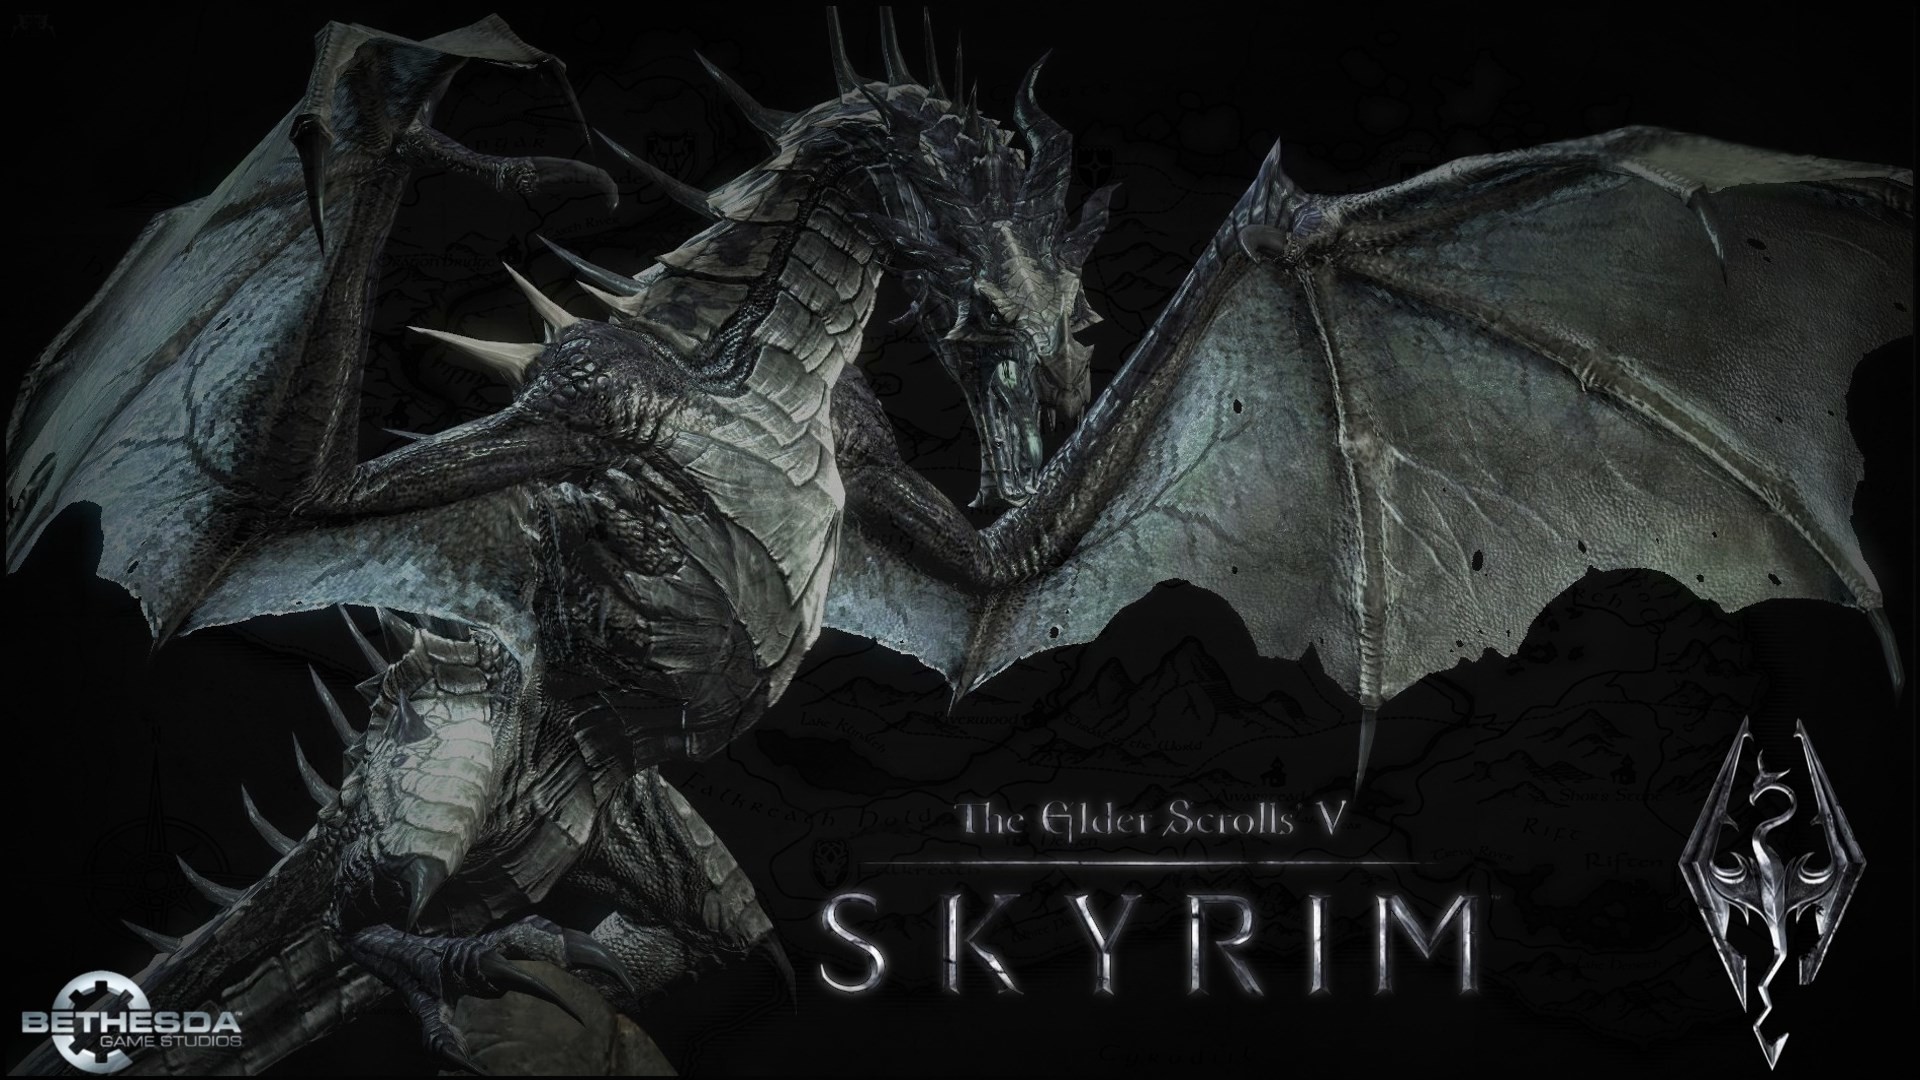 1920x1080 Fantasy Online Role-Playing The Elder Scrolls VSkyrim Wallpaper The Elder  Scrolls V: Skyrim Wallpaper